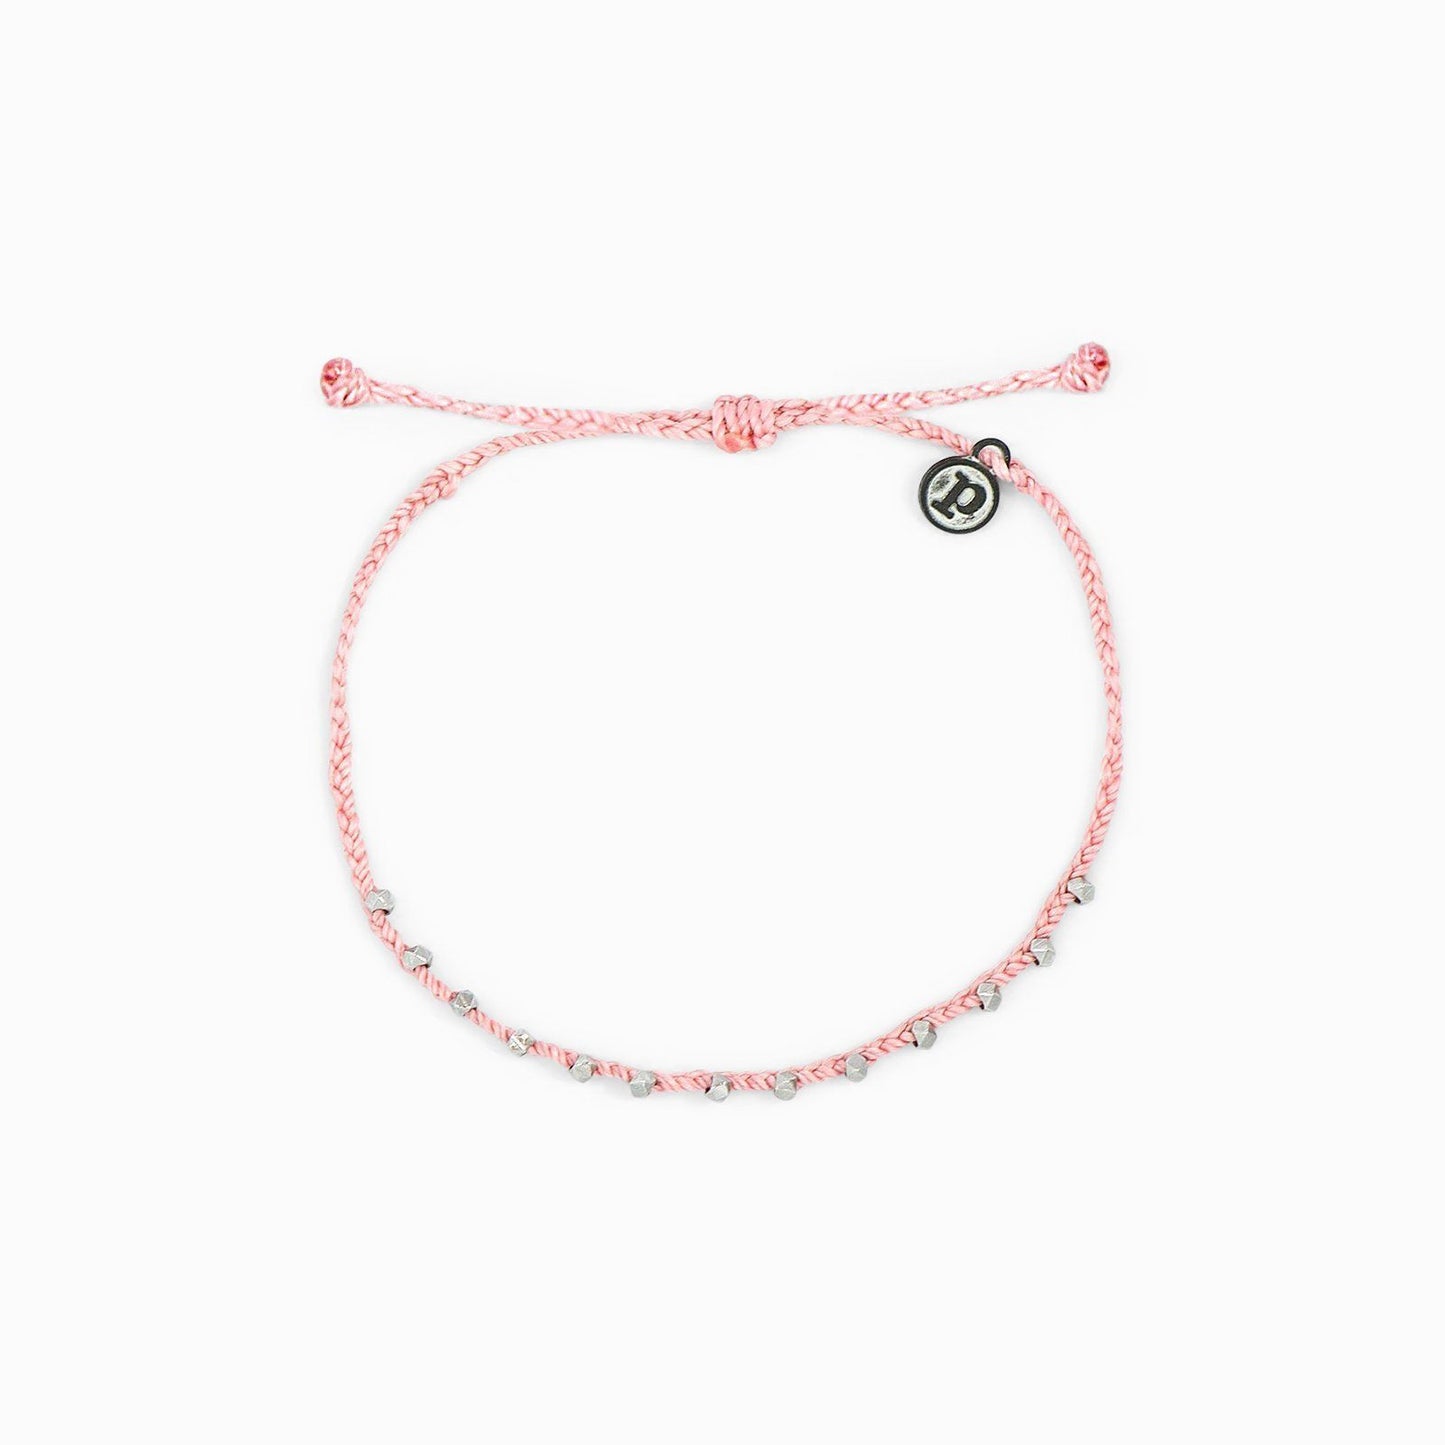 Happy feet are sooo in this summer, and our Stitched Beaded Anklet is guaranteed to make you smile. Each bitty braided band is decorated with teeny tiny beads, and was practically made for stacking (so grab one in every color!).